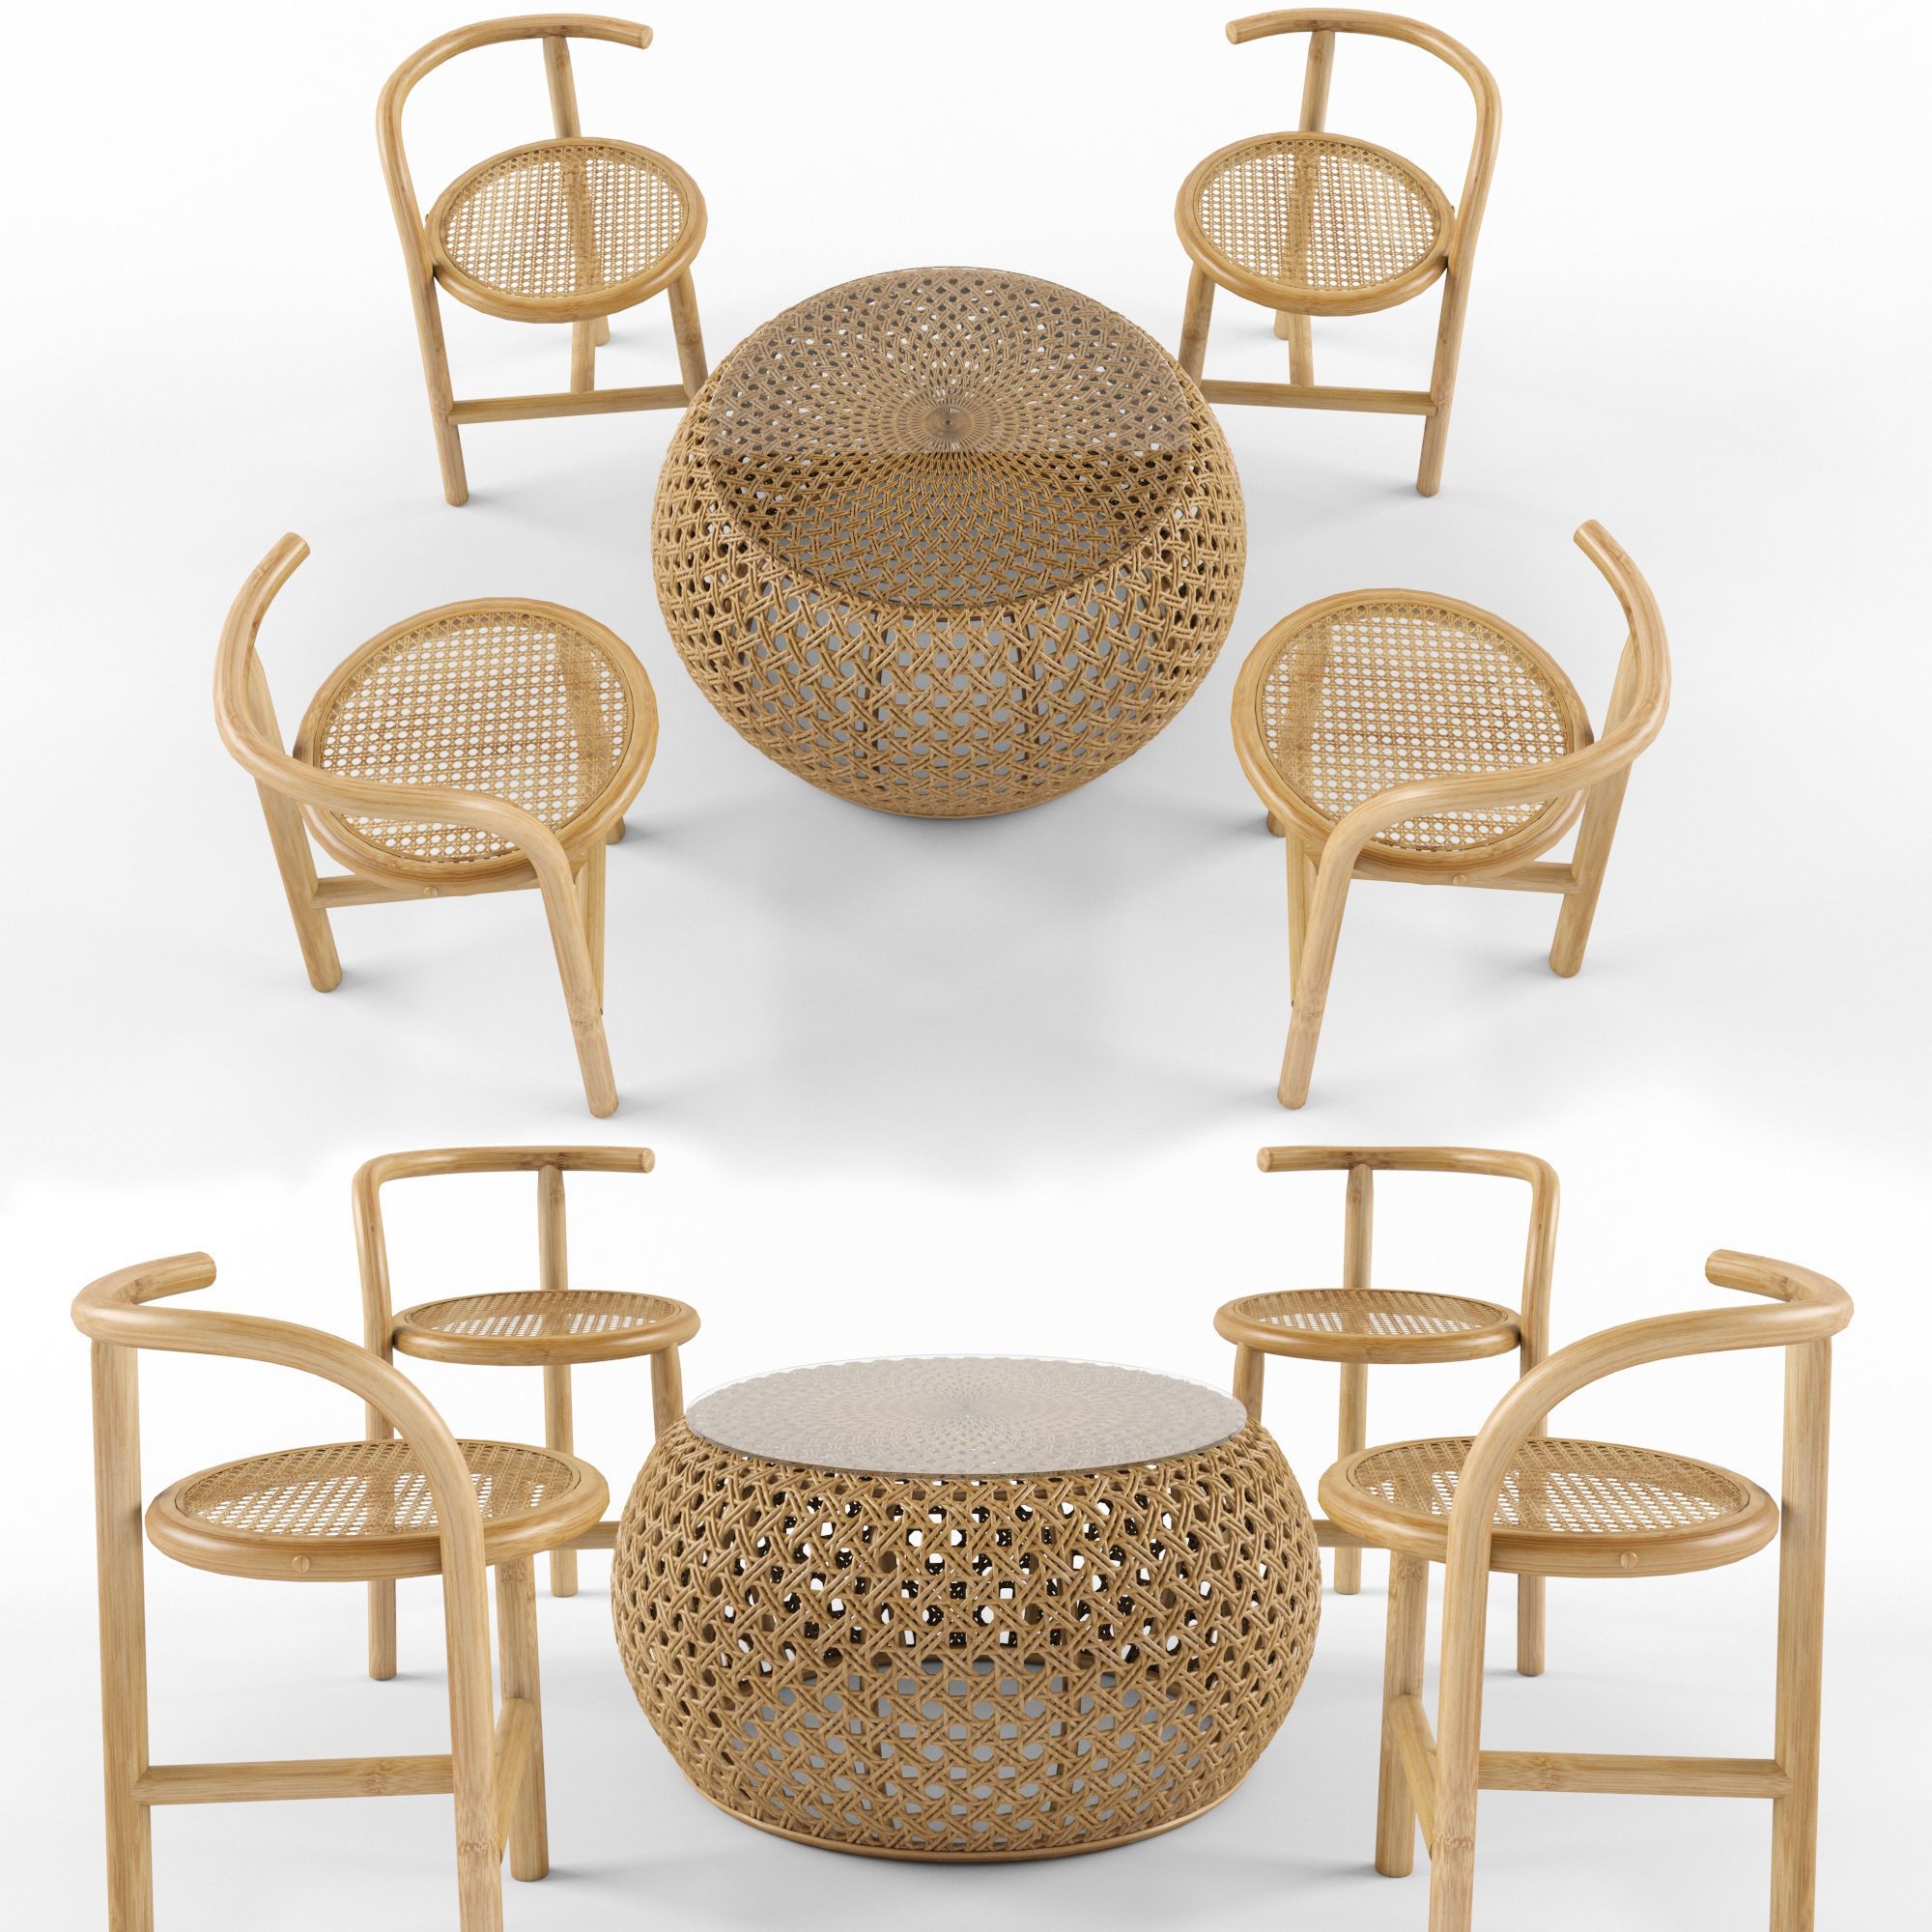 3D Outdoor Natural Rattan Furniture Set | Cgtrader Throughout Natural Woven Modern Outdoor Chairs Sets (View 4 of 15)